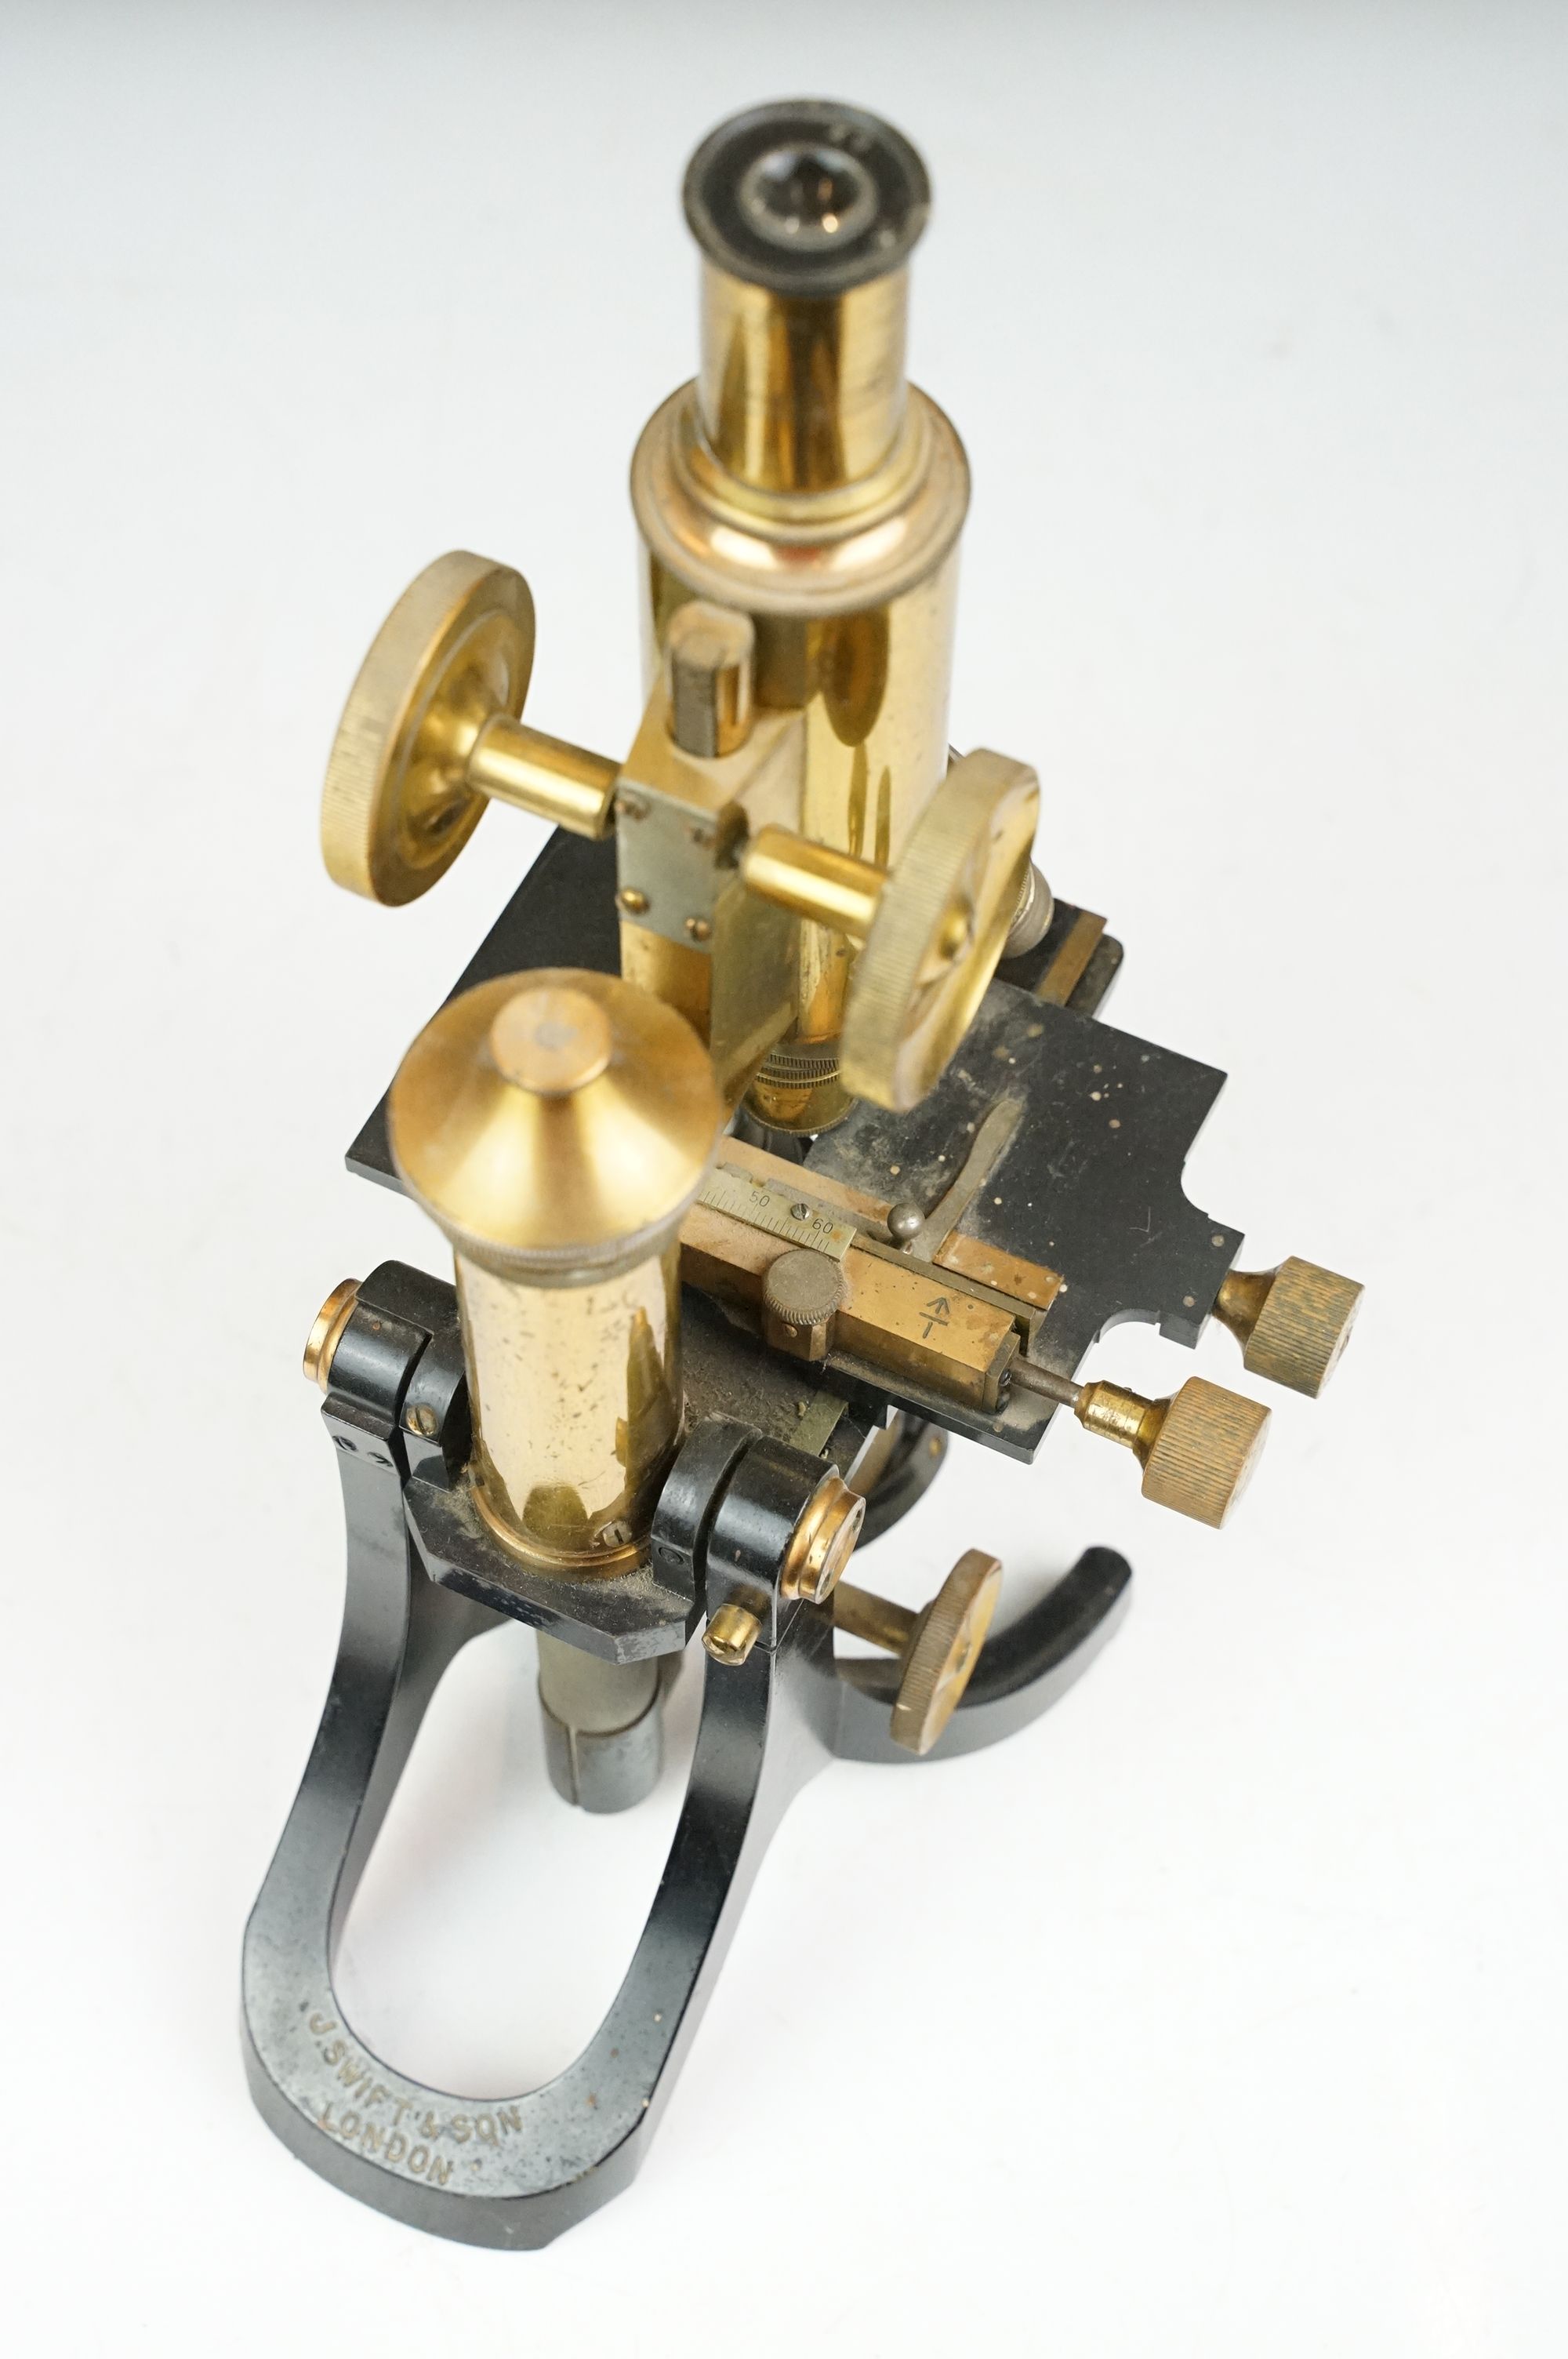 J. Swift & Son of London brass lacquered microscope, housed within a wooden carry case (missing - Image 3 of 11